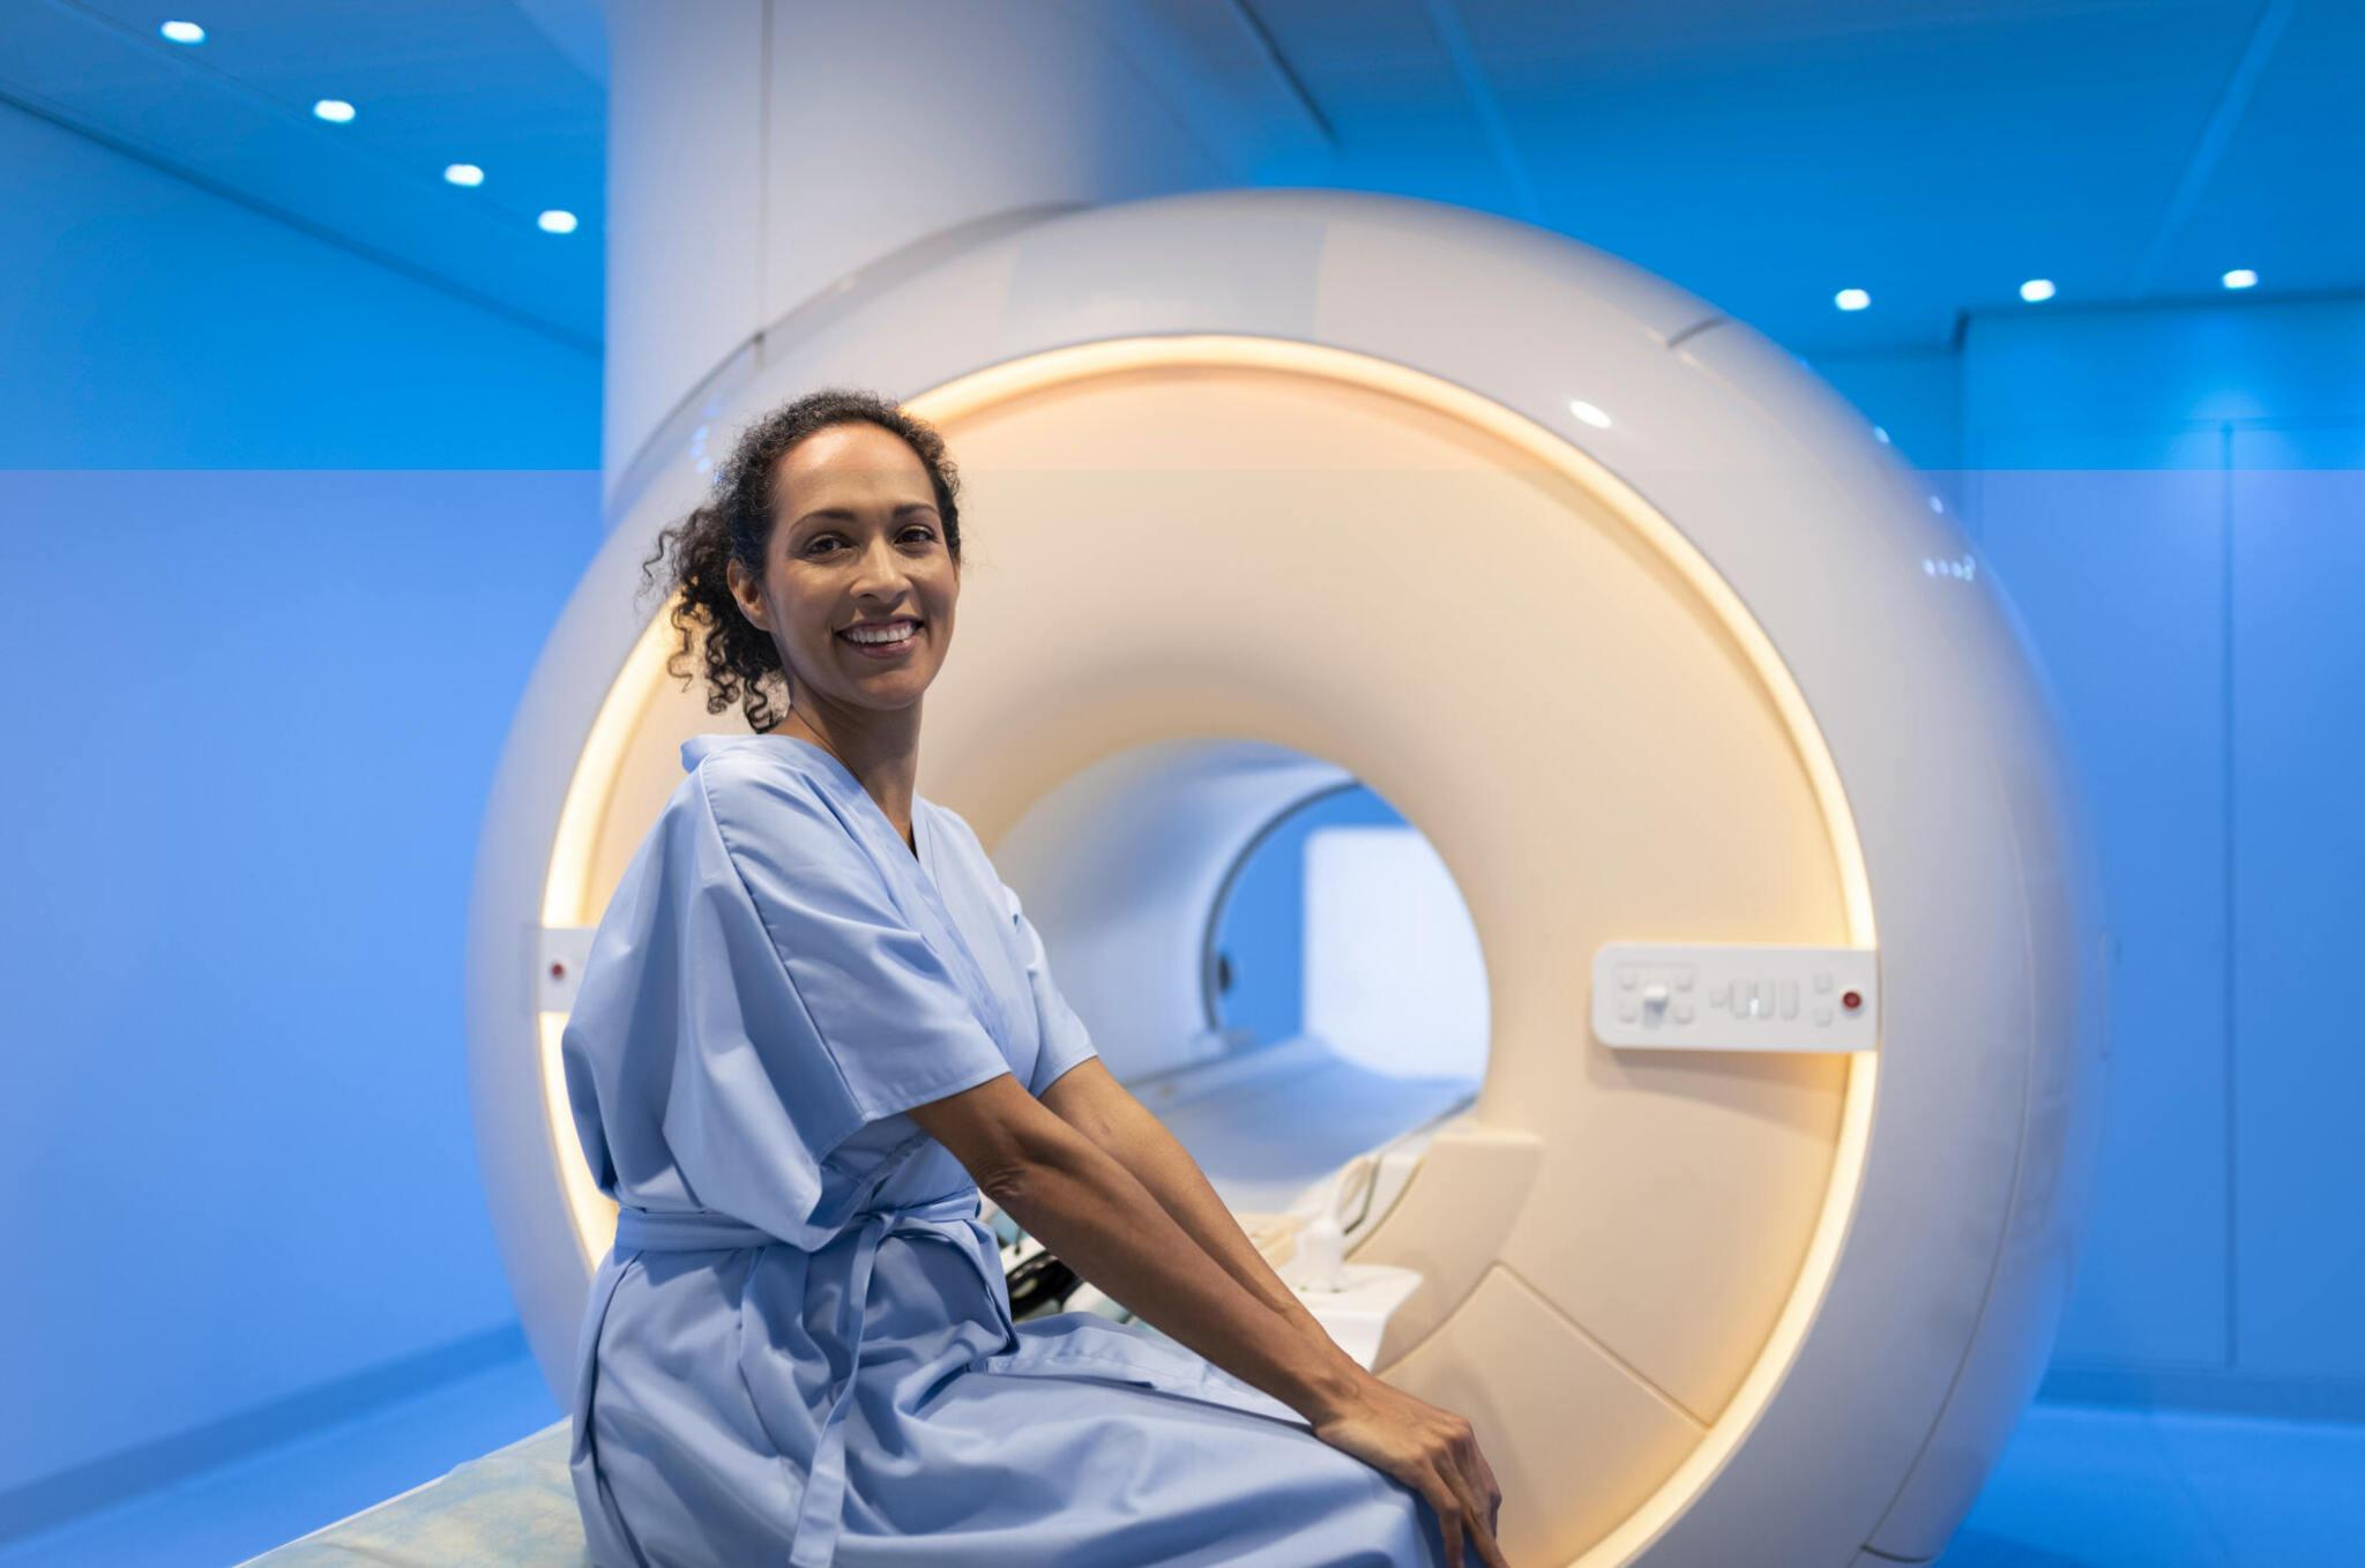 Book an MRI Appointment with Hollywood Diagnostics Center in Hollywood FL